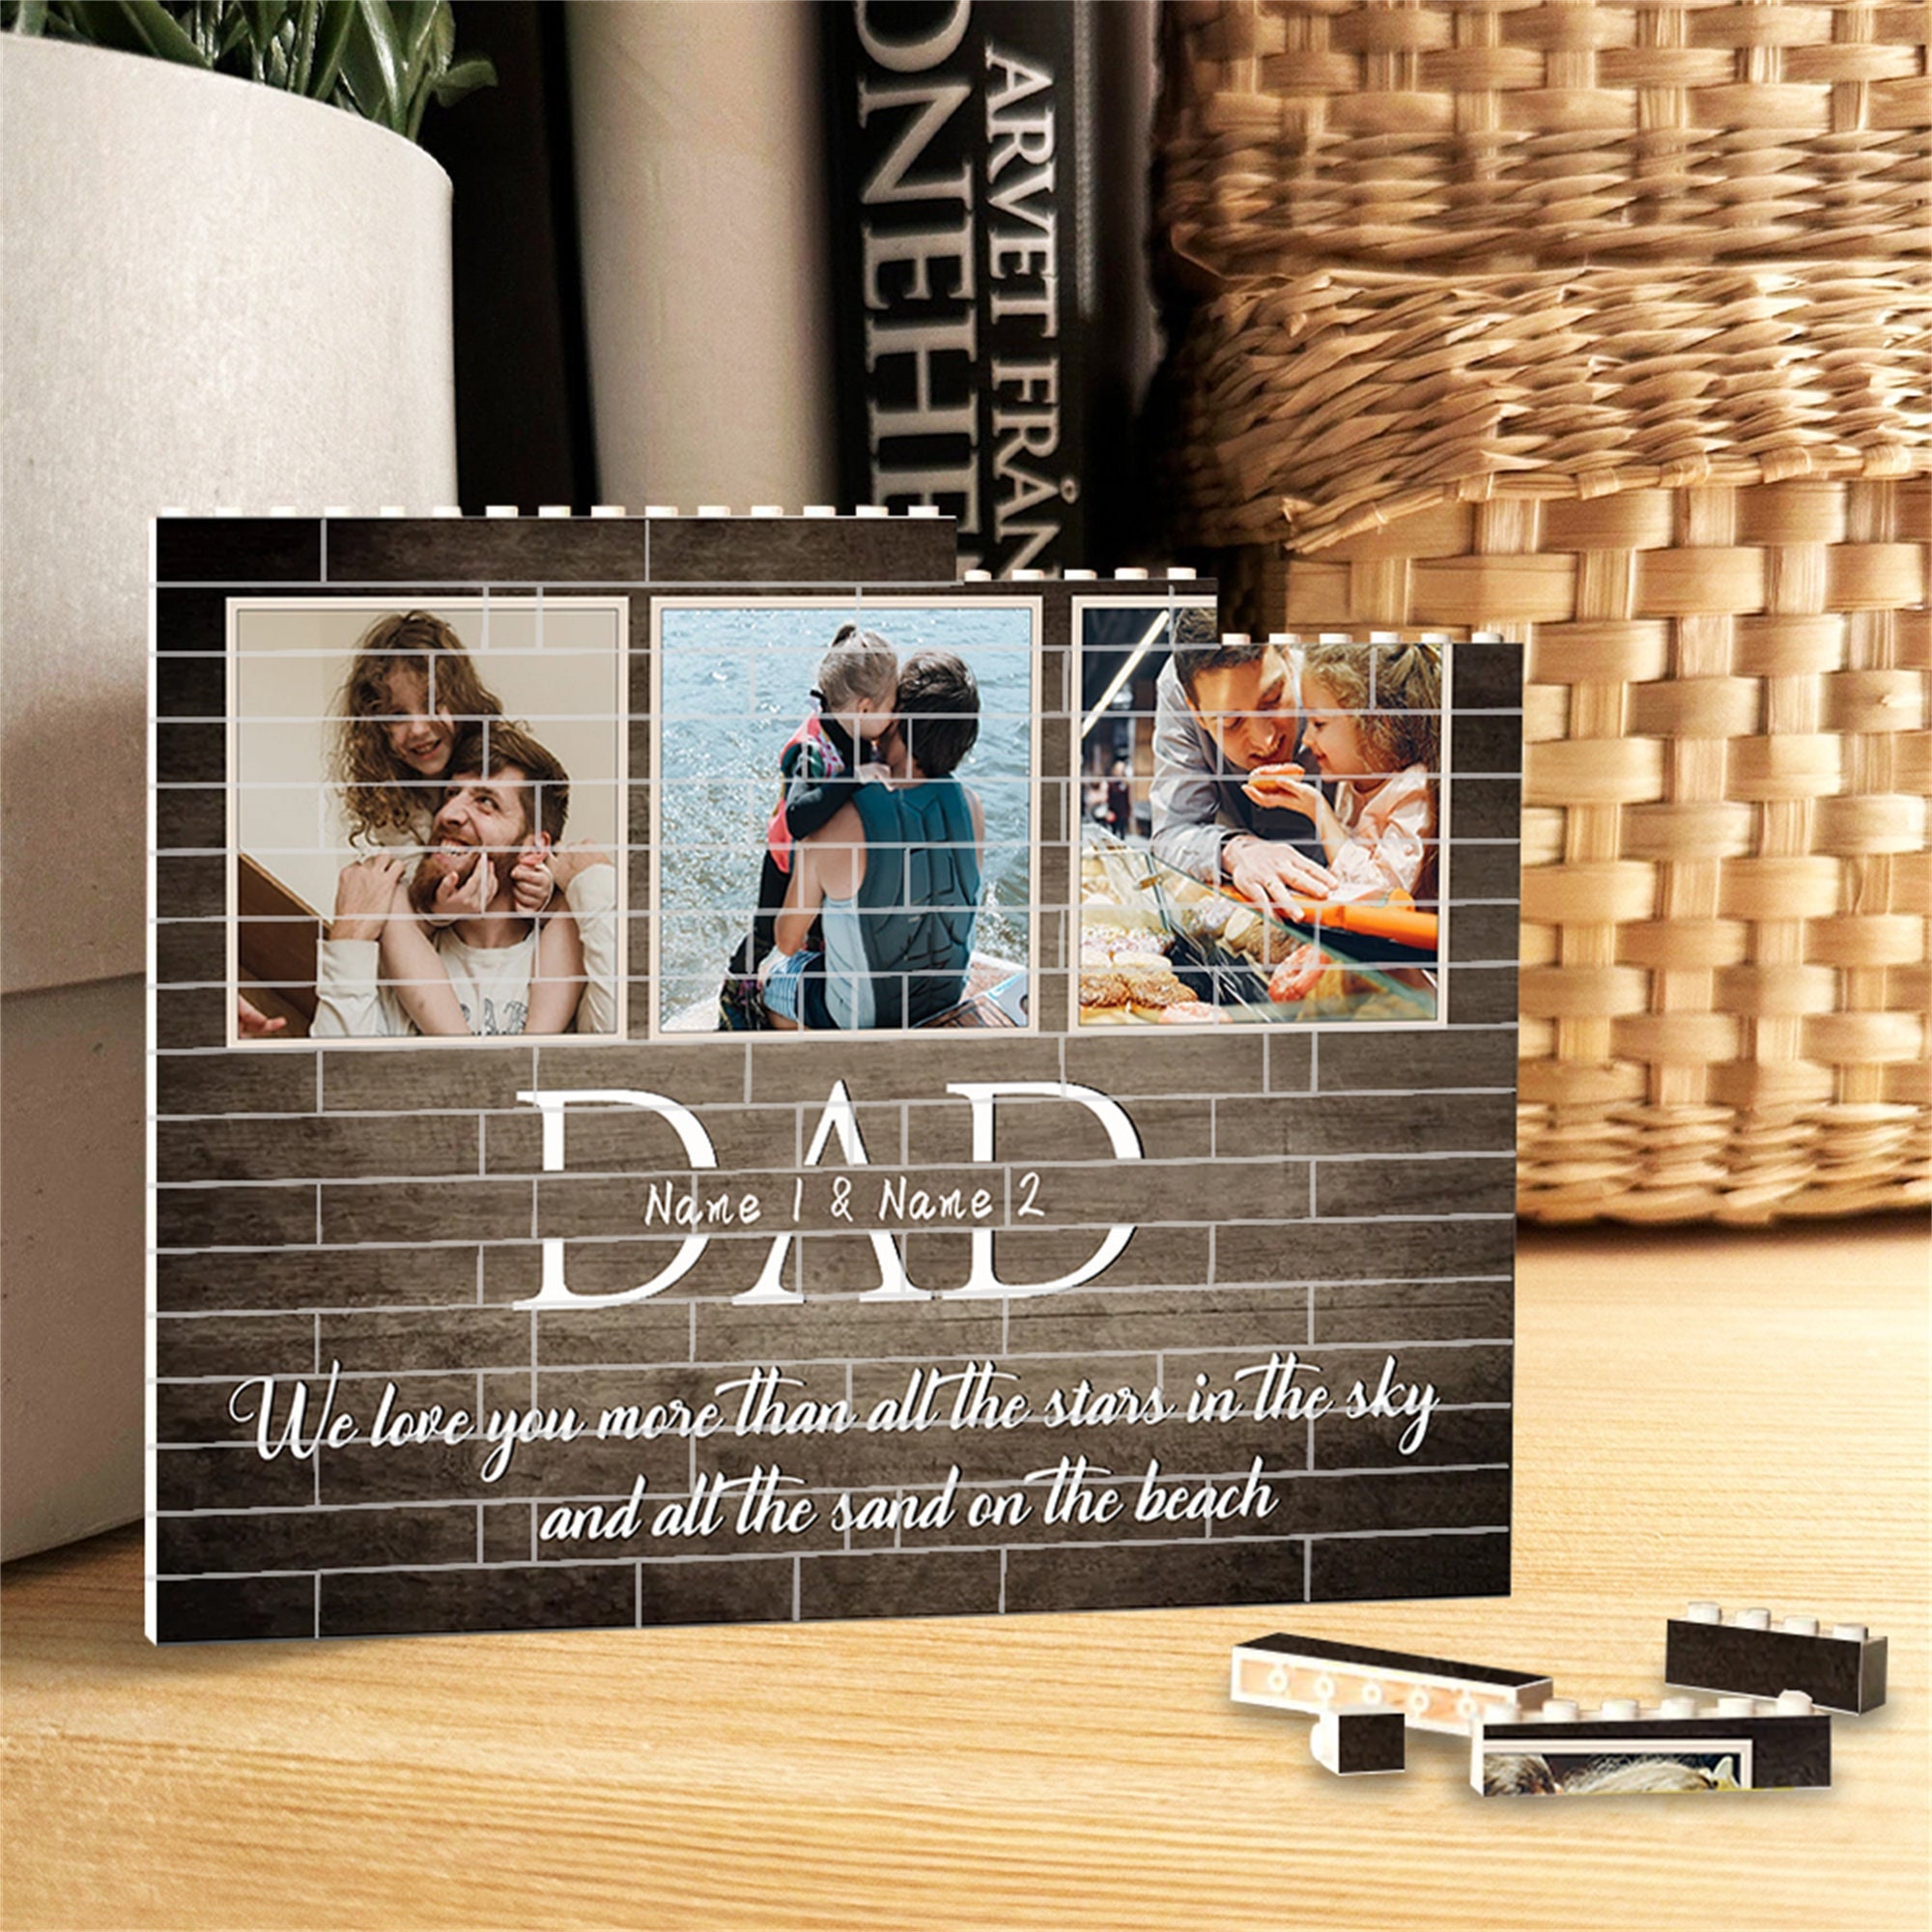 VELENTI Gifts for Son - Engraved Acrylic Block Puzzle Son Gift 3.35 x 2.76  inch - Son Thank You Gift from Mom and Dad - Birthday Mother Son, Father